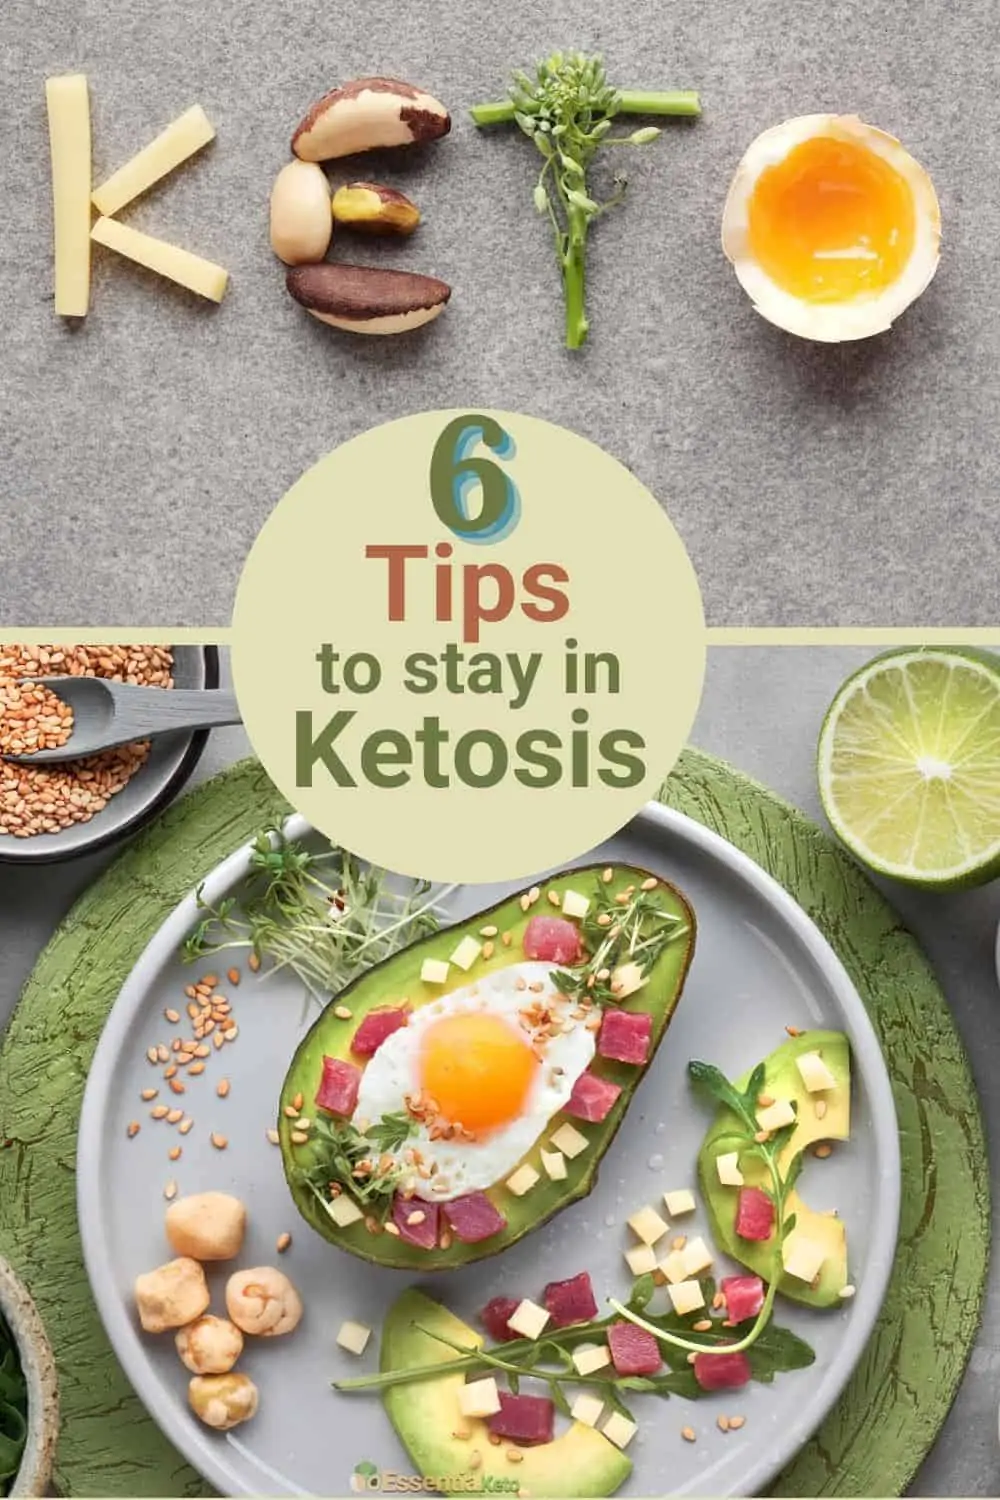 6 tips to stay in ketosis Tonic River Make Staying in Ketosis Easier with these Tips